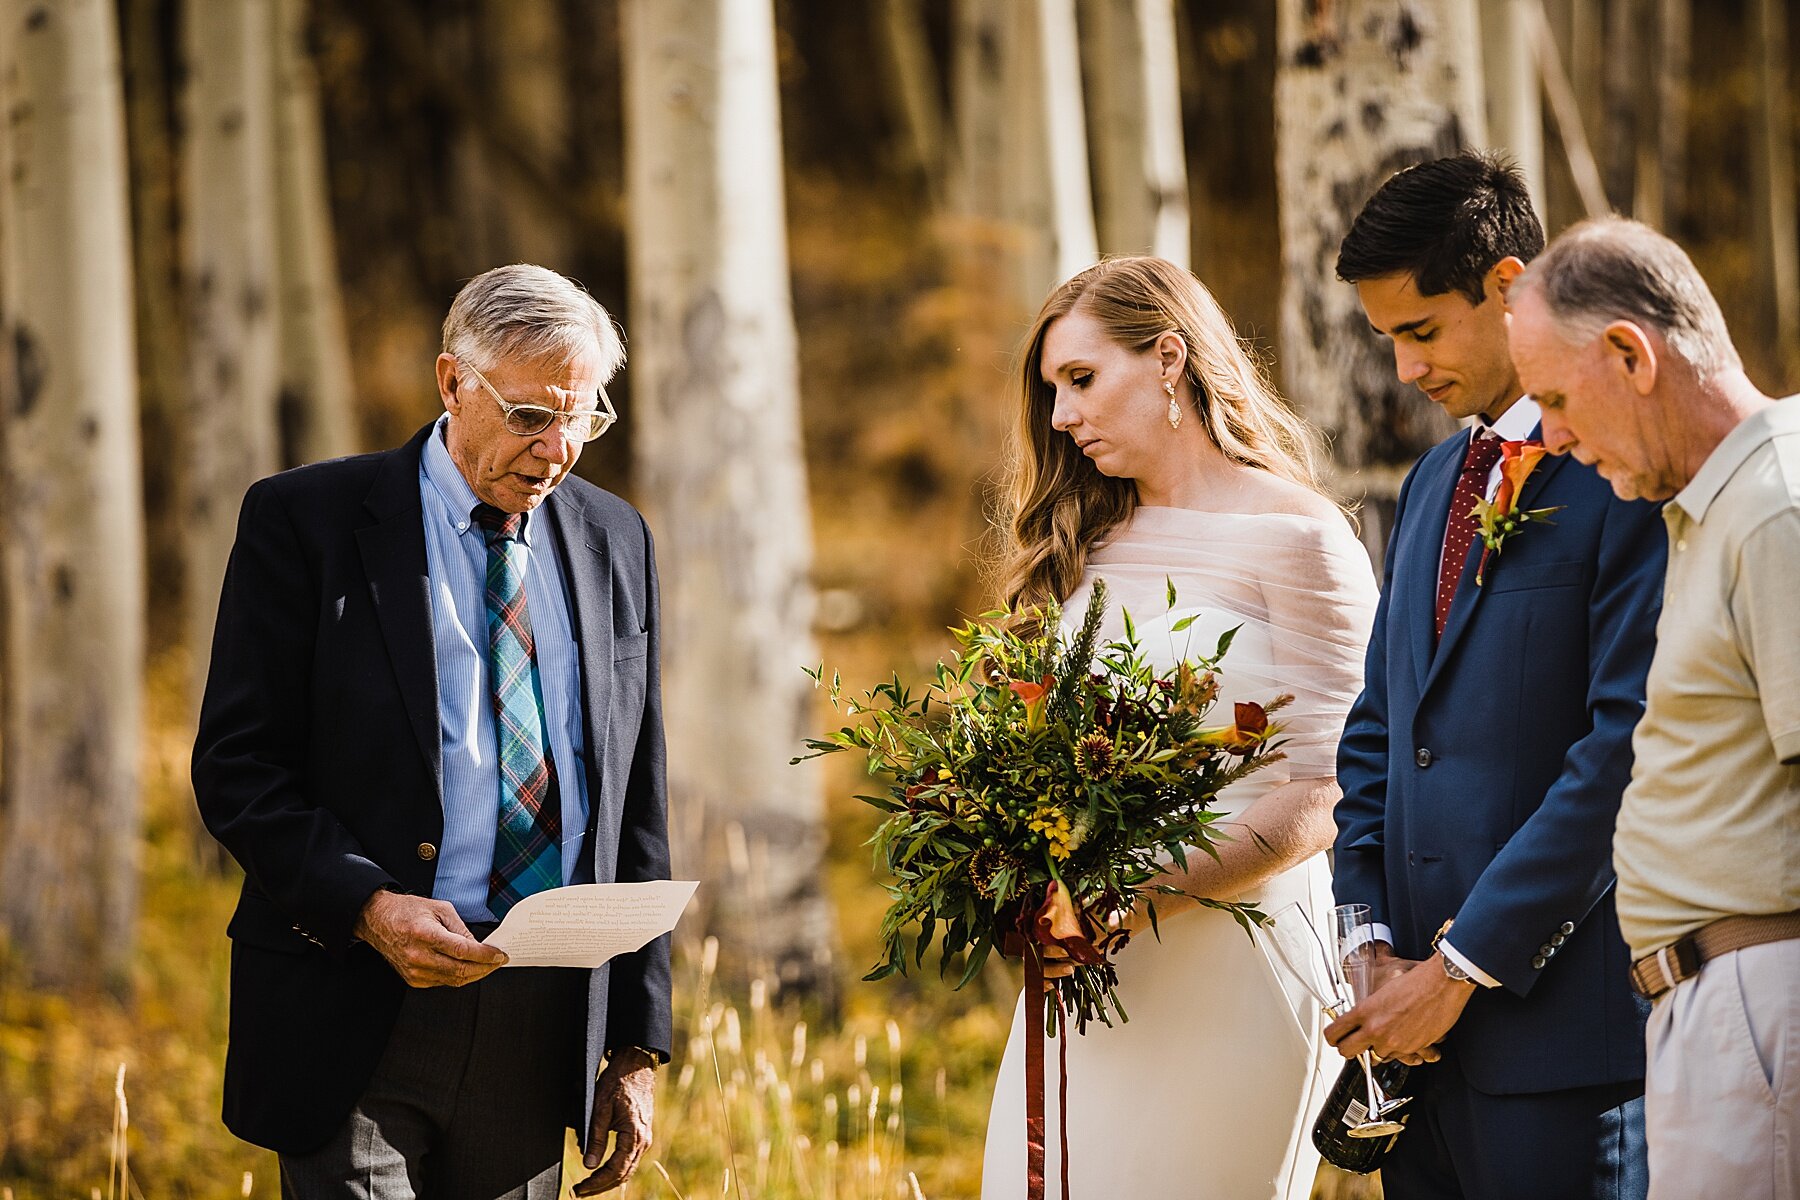 Ouray Off-Road Jeep Elopement | Colorado Elopement | Vow of the Wild